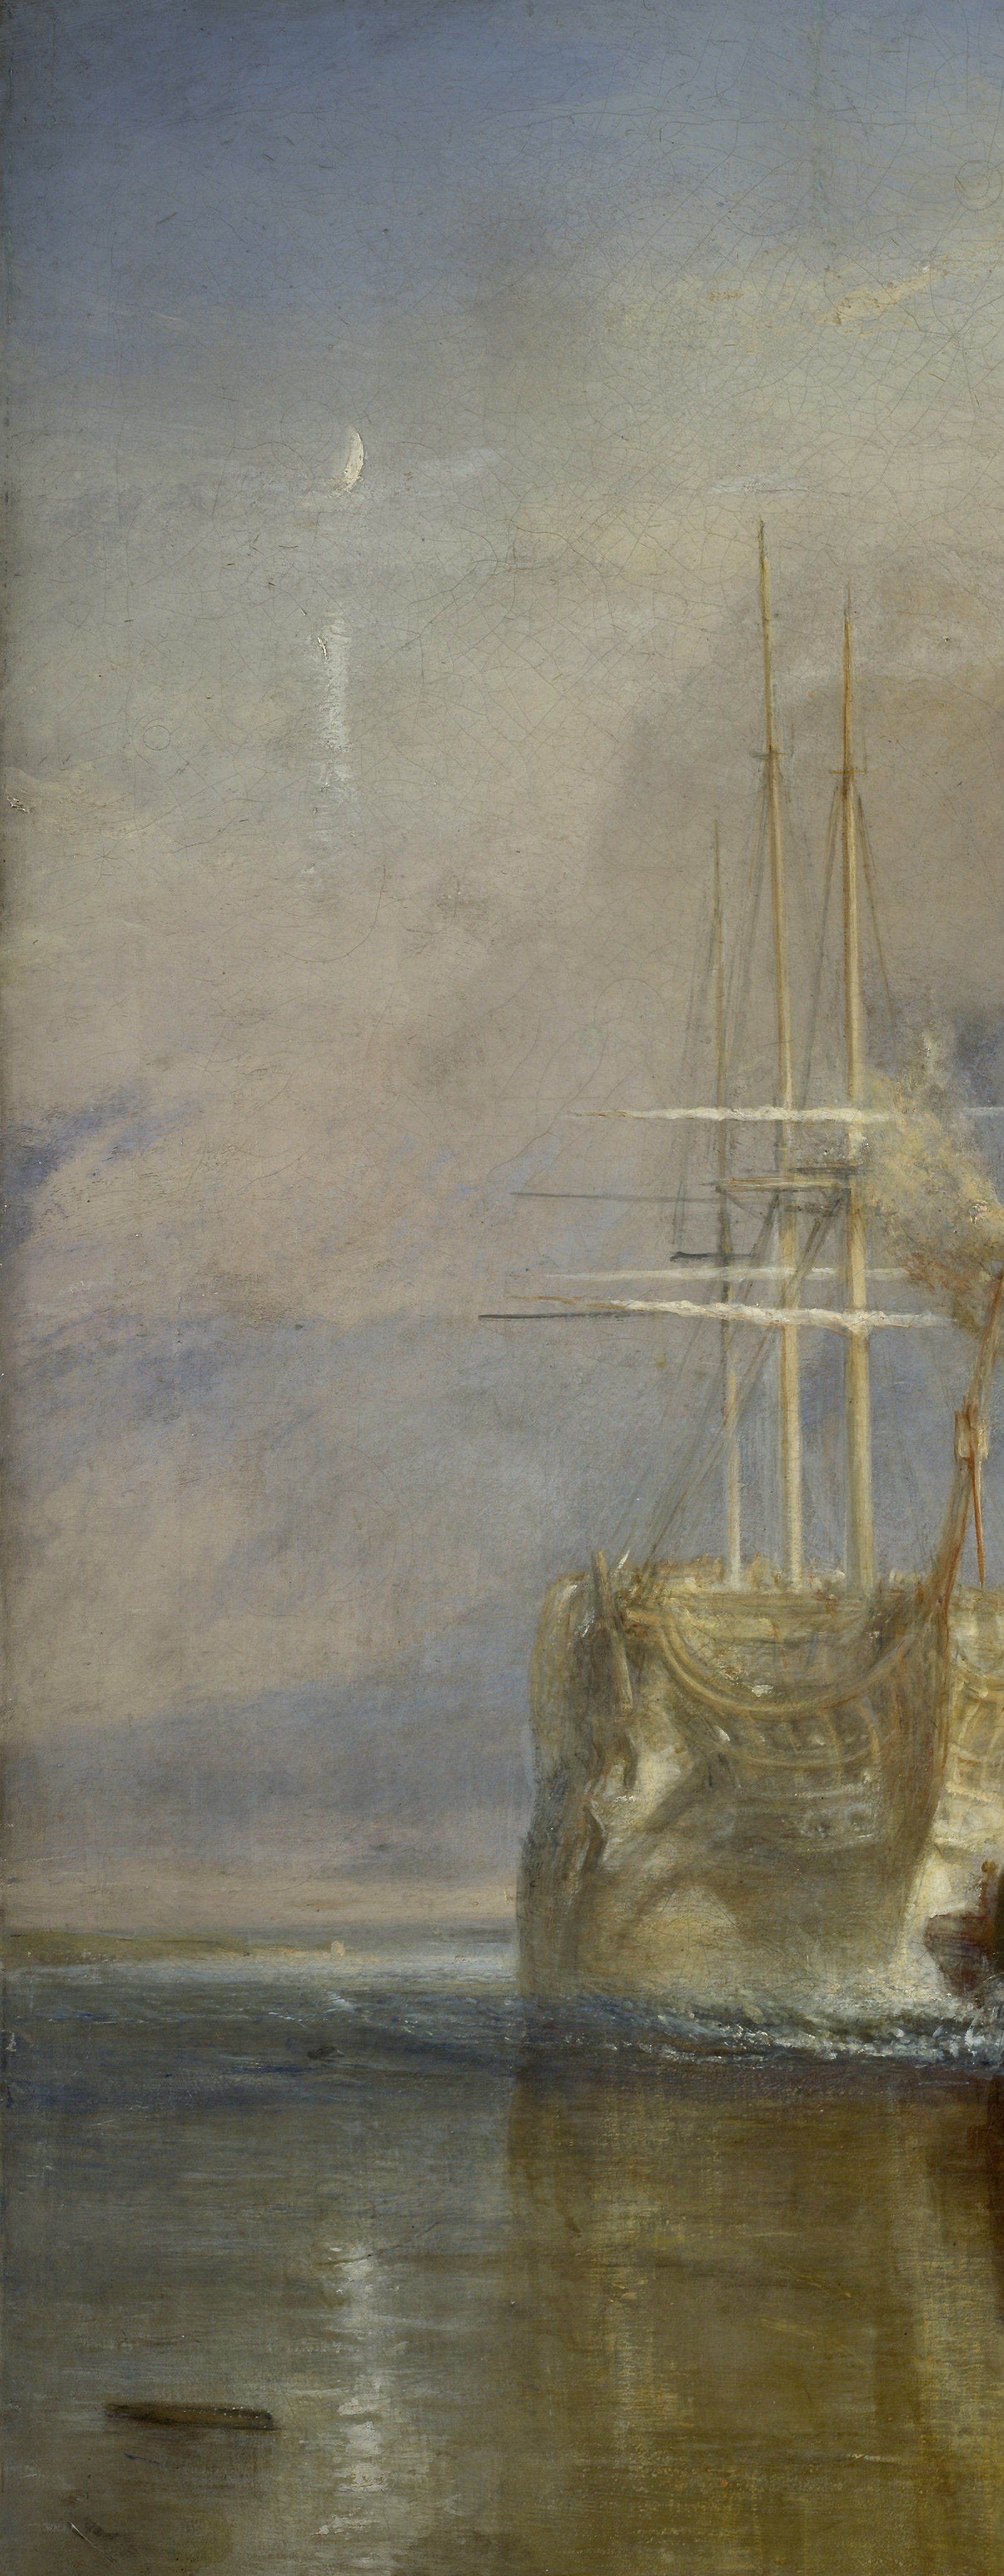 The_Fighting_Temeraire,_JMW_Turner,_National_Gallery